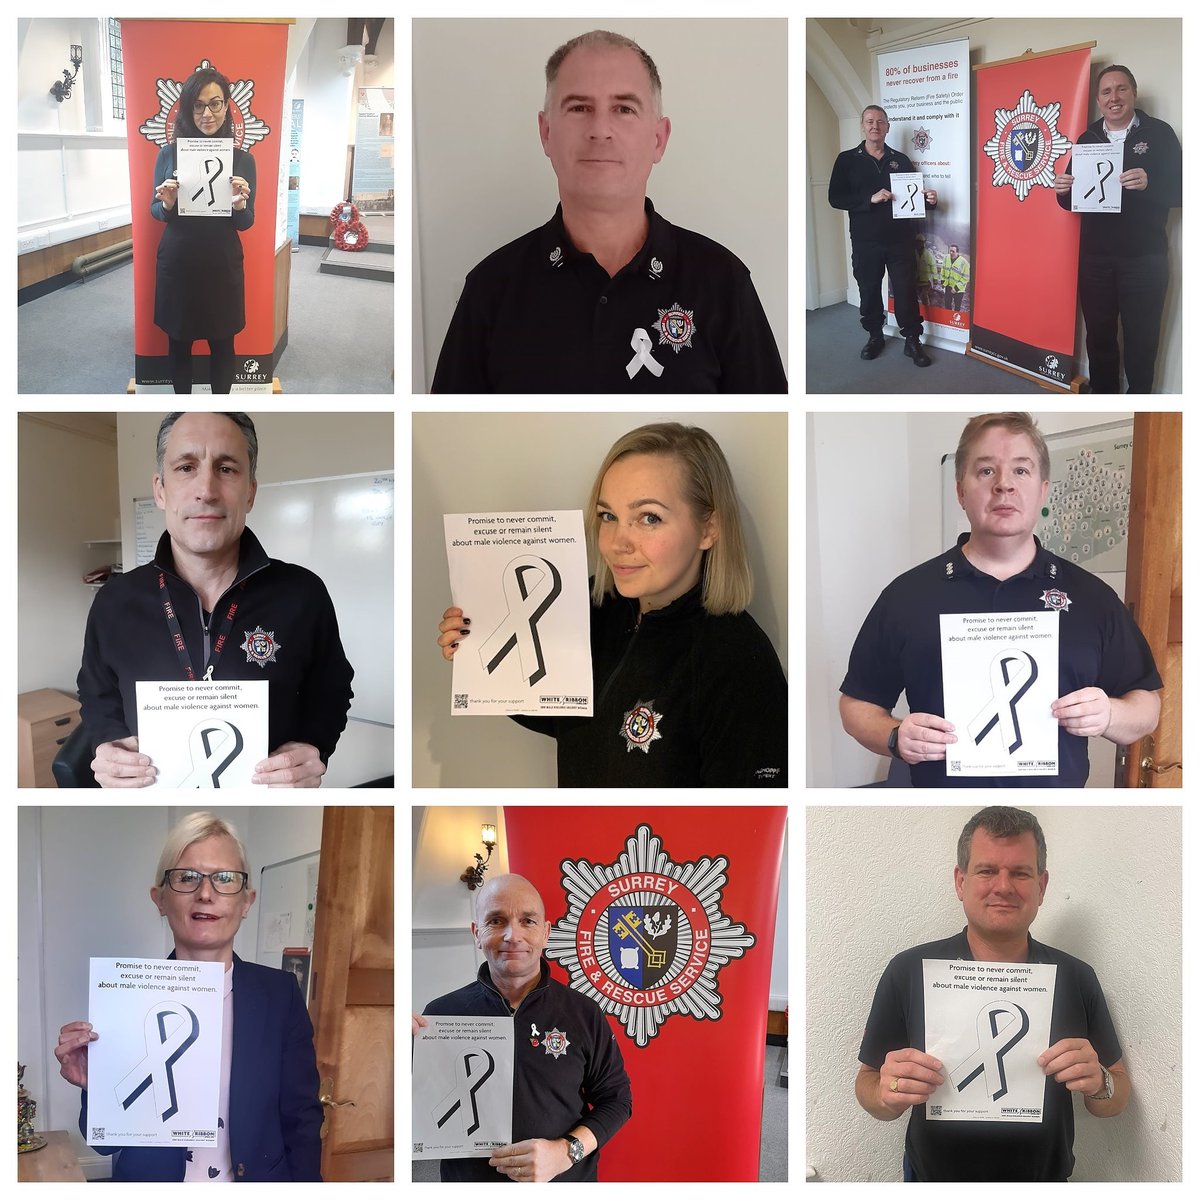 For #WhiteRibbonDay our colleagues are taking a stand to END violence against women. There's been an increase in domestic abuse & other violence against women during the pandemic. Call the Your Sanctuary helpline on 01483 776 822. Dial 999 in an emergency. You are not alone.